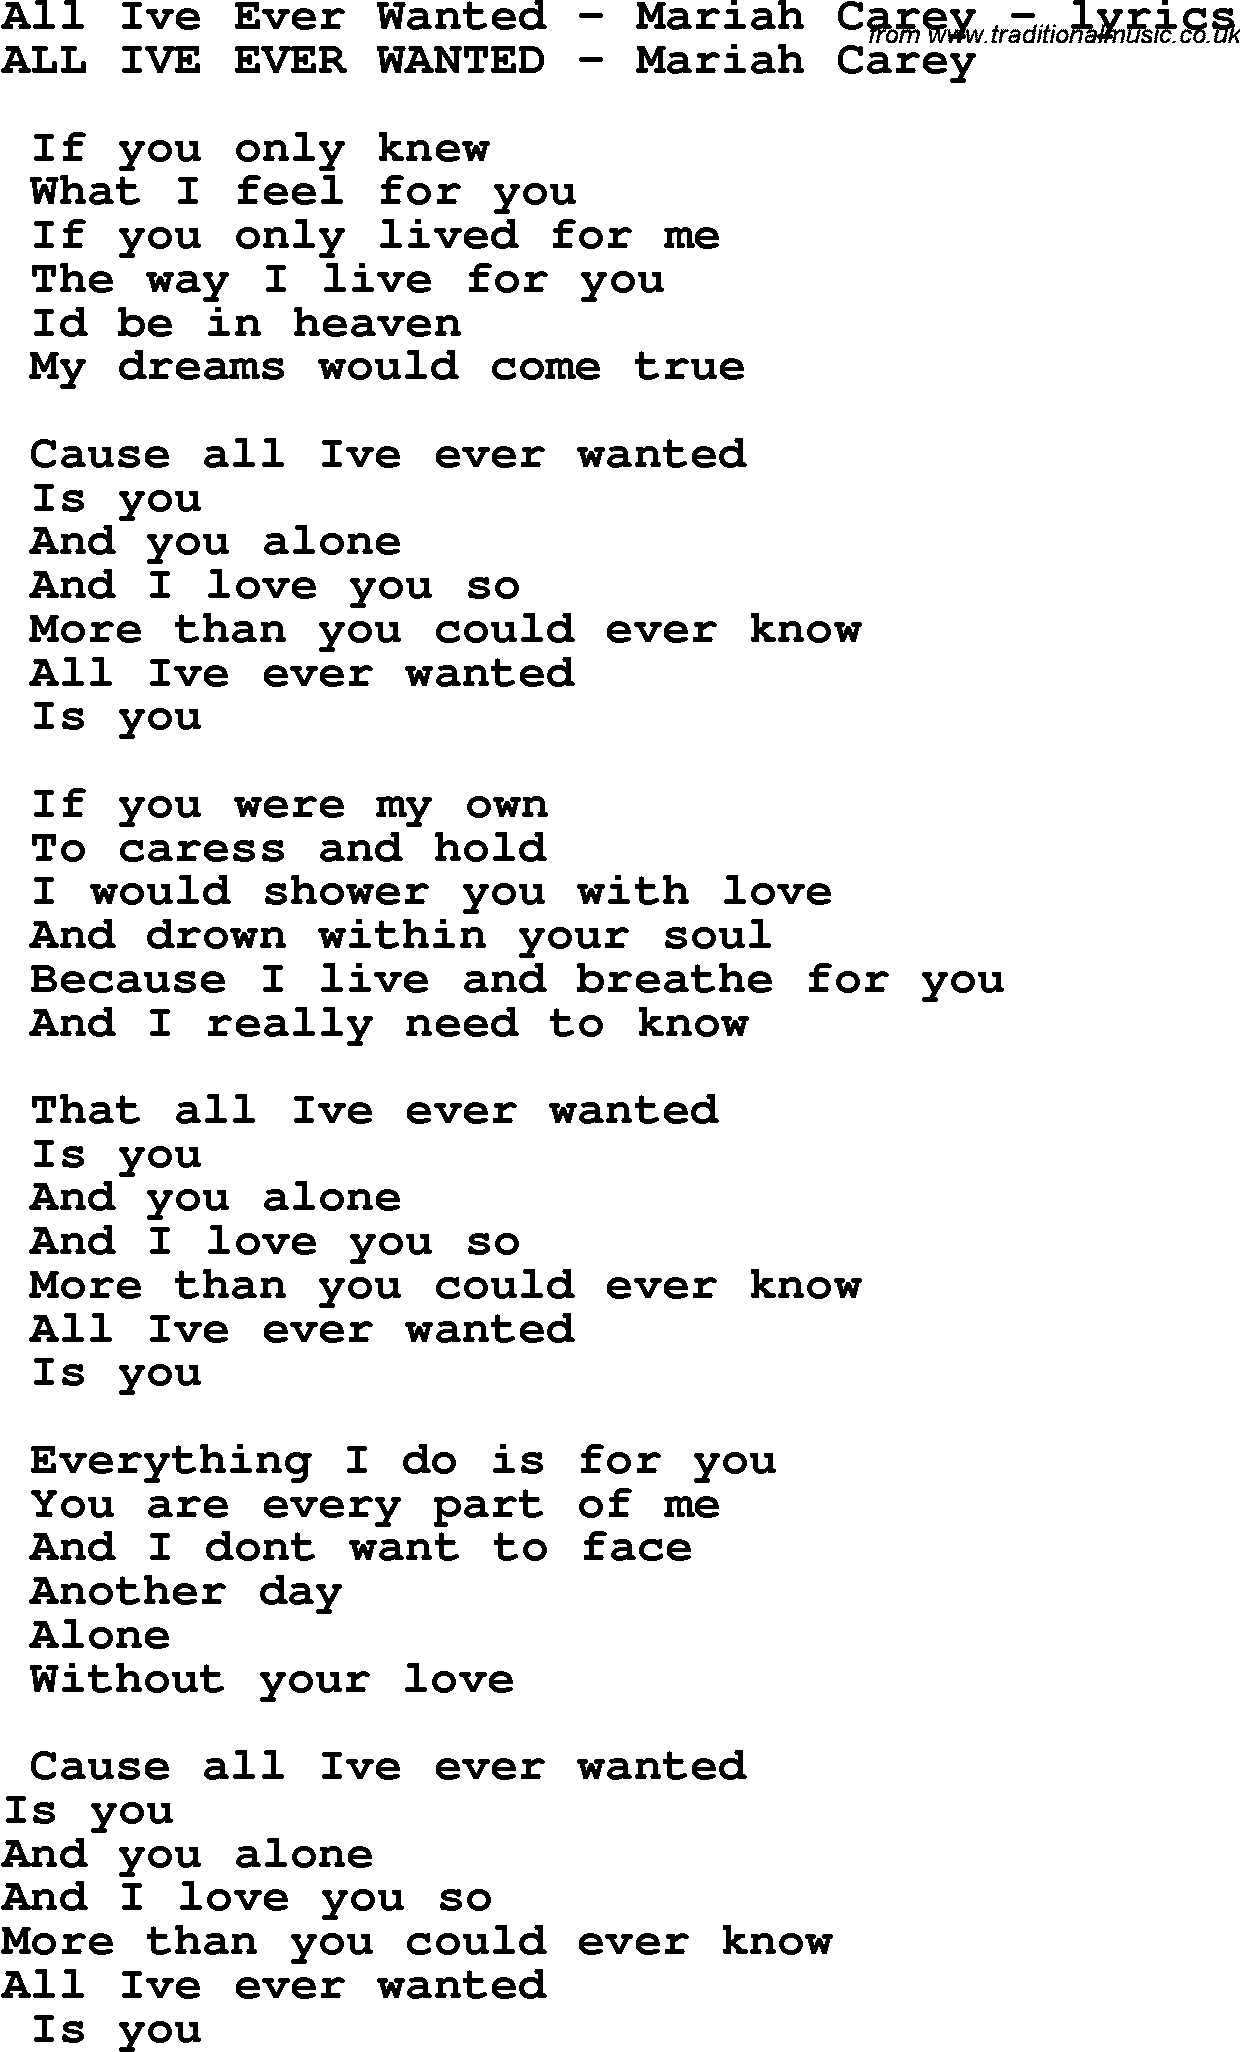 Love Song Lyrics for: All Ive Ever Wanted - Mariah Carey